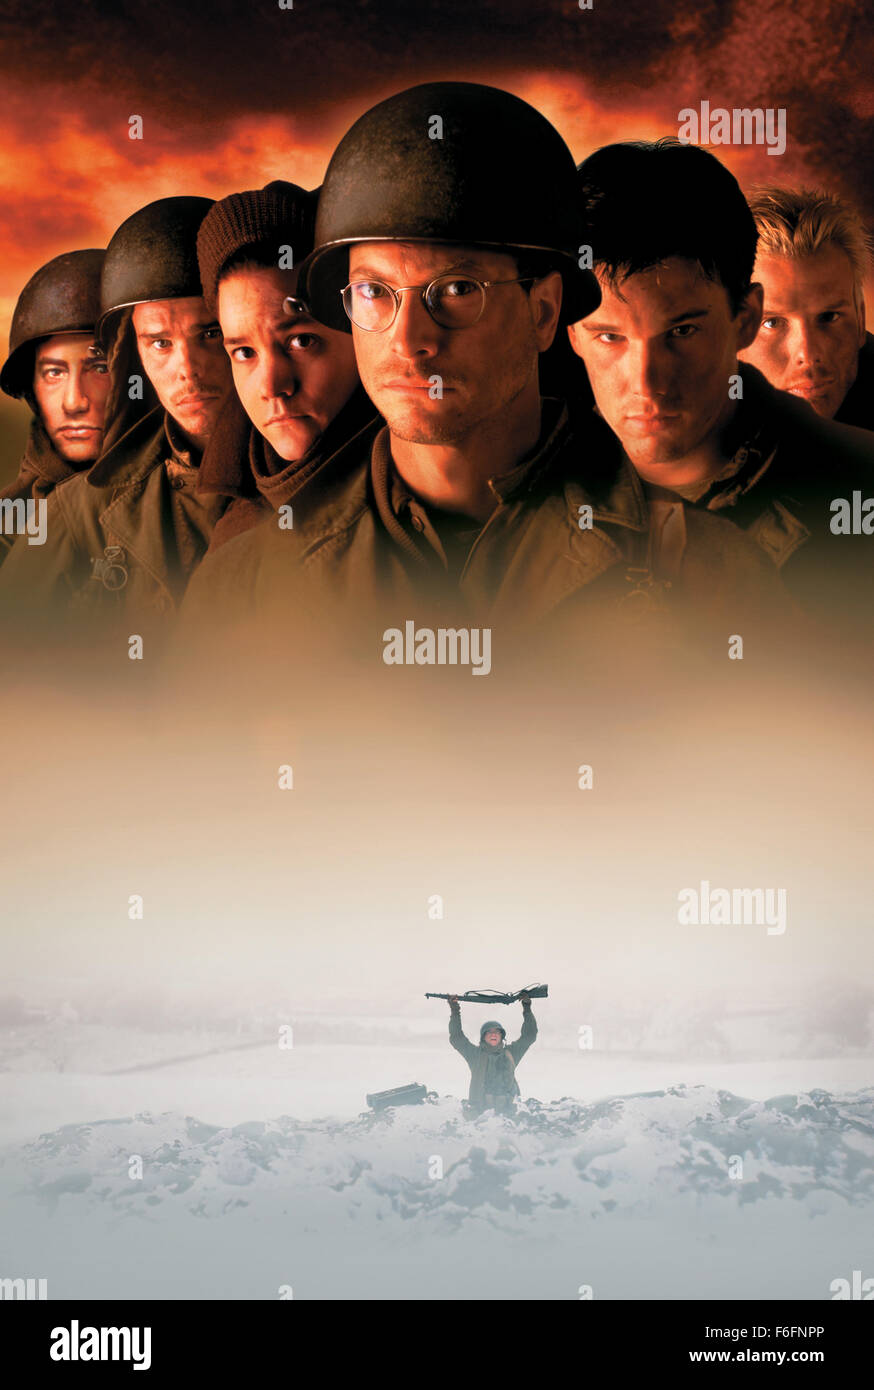 RELEASE DATE: April 24, 1992. MOVIE TITLE: A Midnight Clear. STUDIO: A&M Films. PLOT: Set in 1944 France, an American Intelligence Squad locates a German Platoon wishing to surrender rather than die in Germany's final war offensive. The two groups of men, isolated from the war at present, put aside their differences and spend Christmas together before the surrender plan turns bad and both sides are forced to fight the other. PICTURED: Movie Poster. Stock Photo